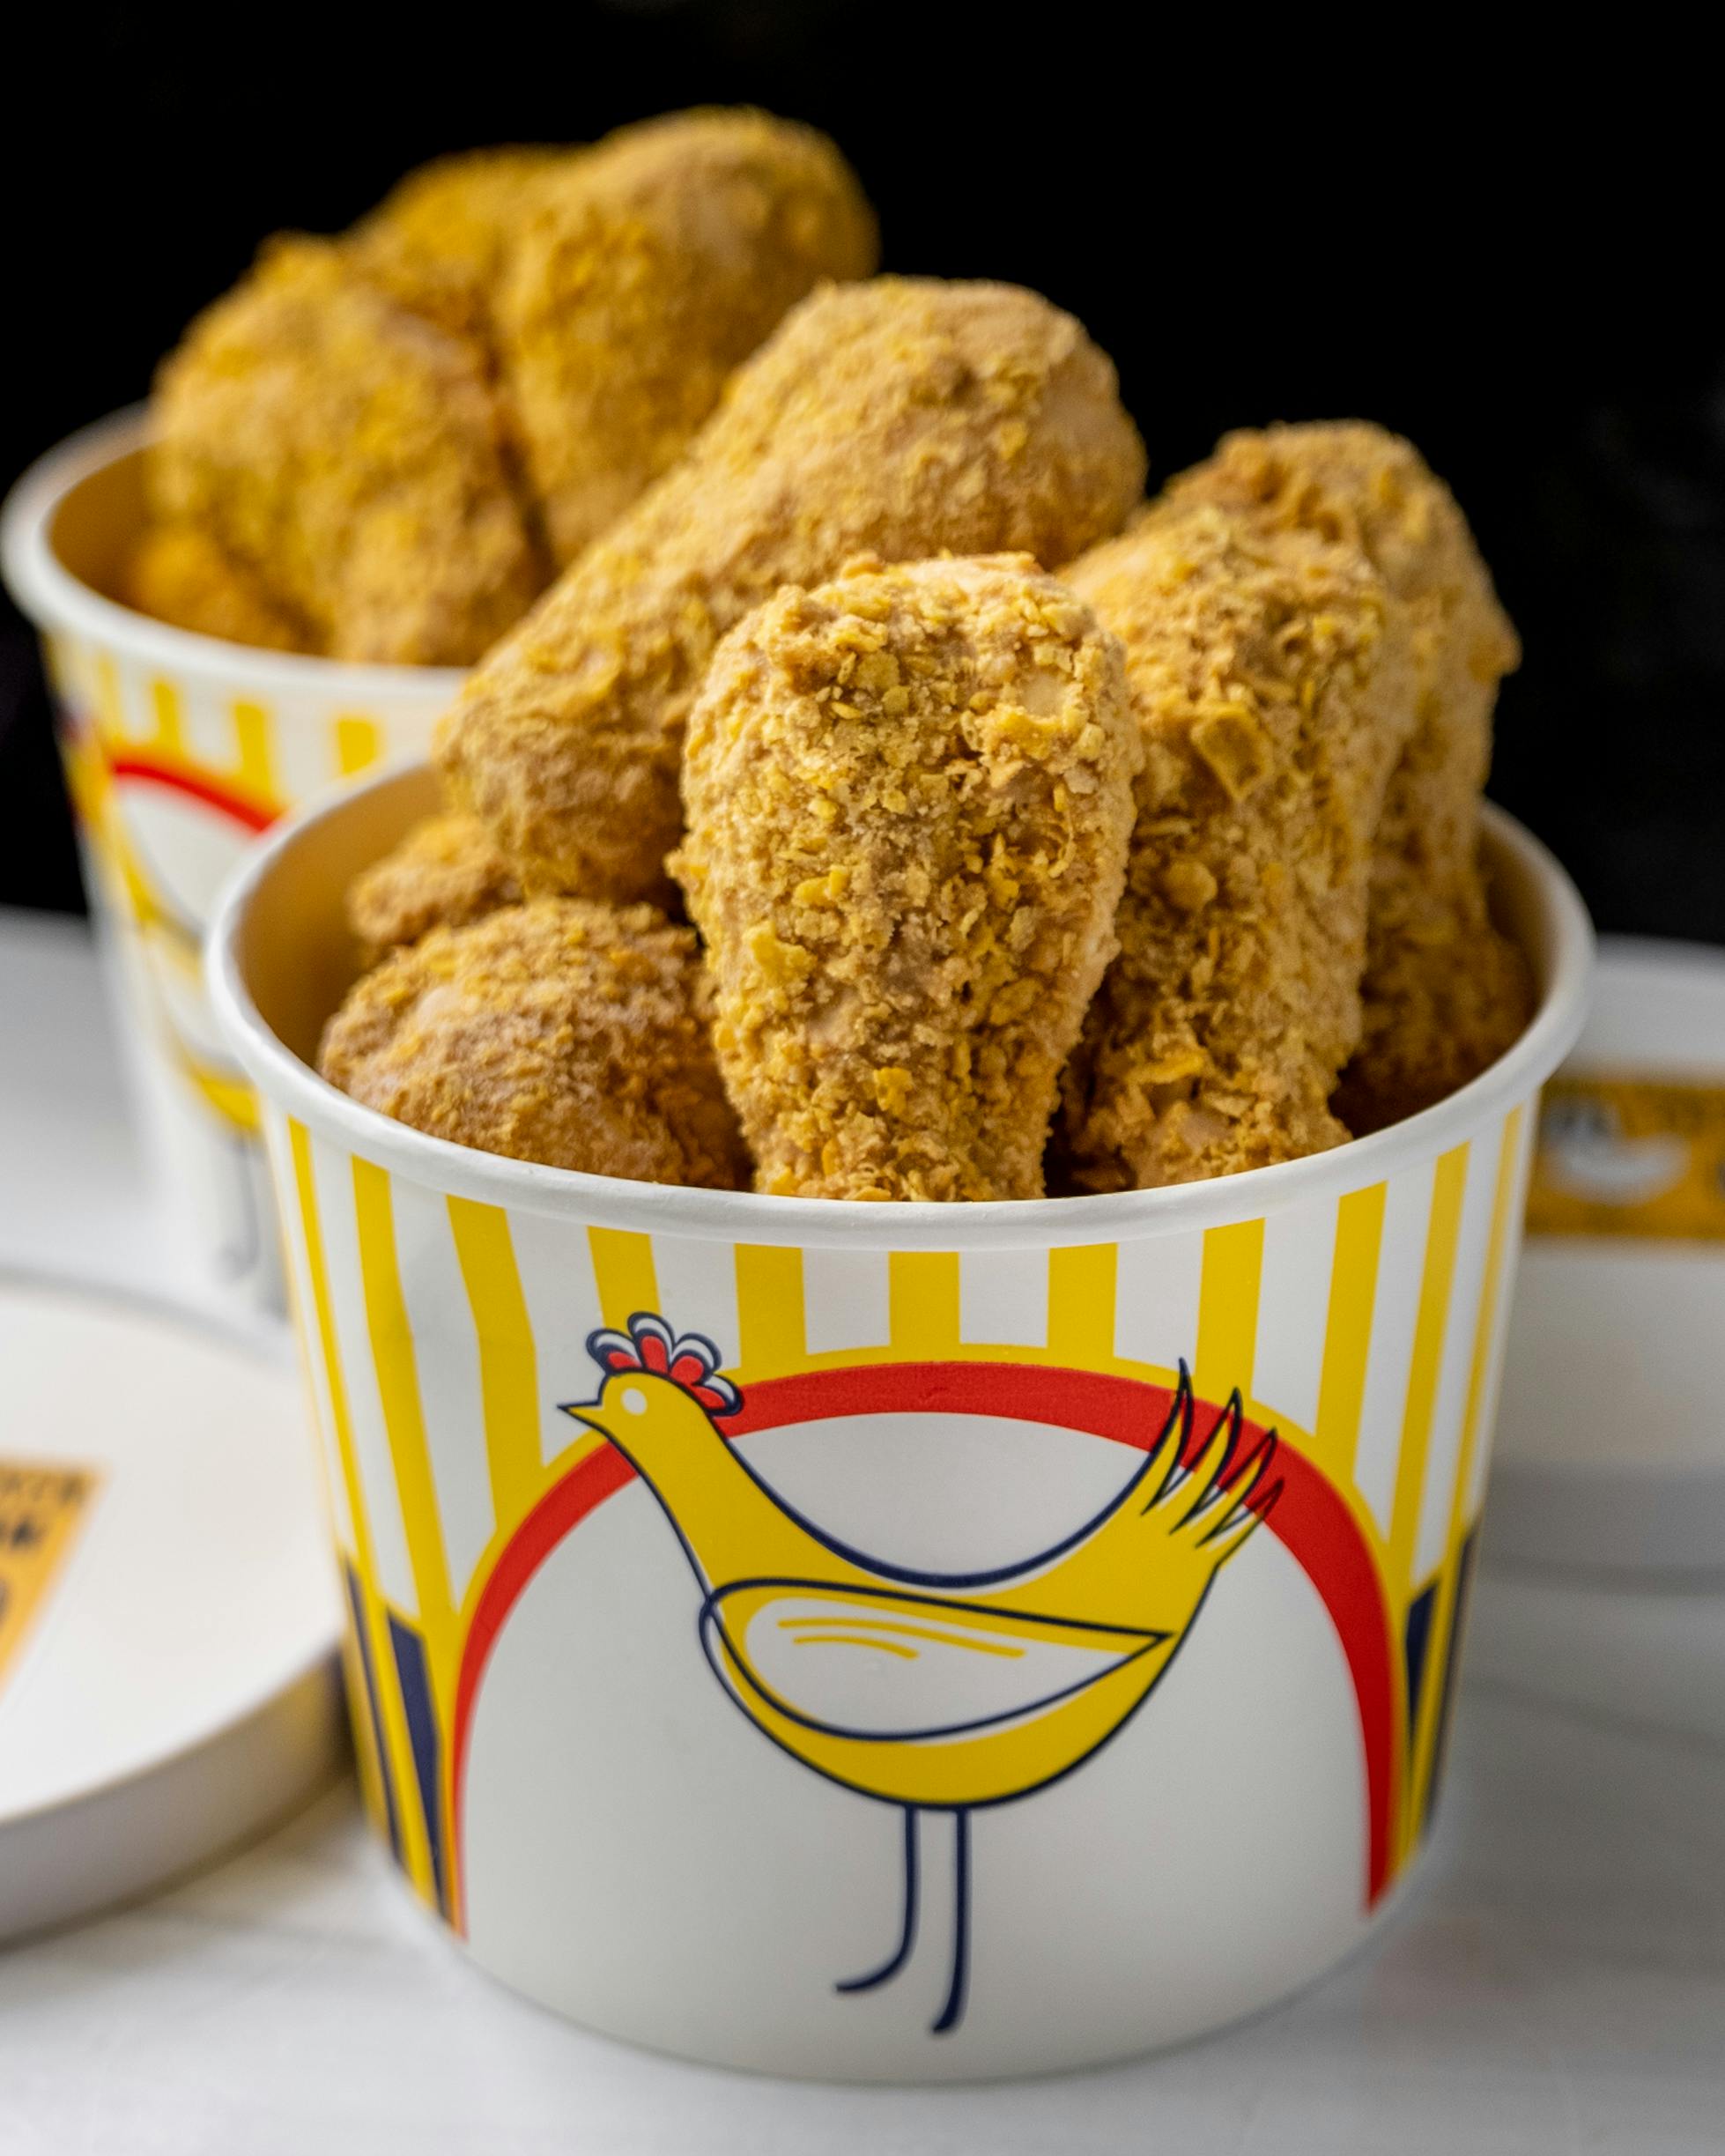 Delicious-looking fried chicken treat is actually ice cream